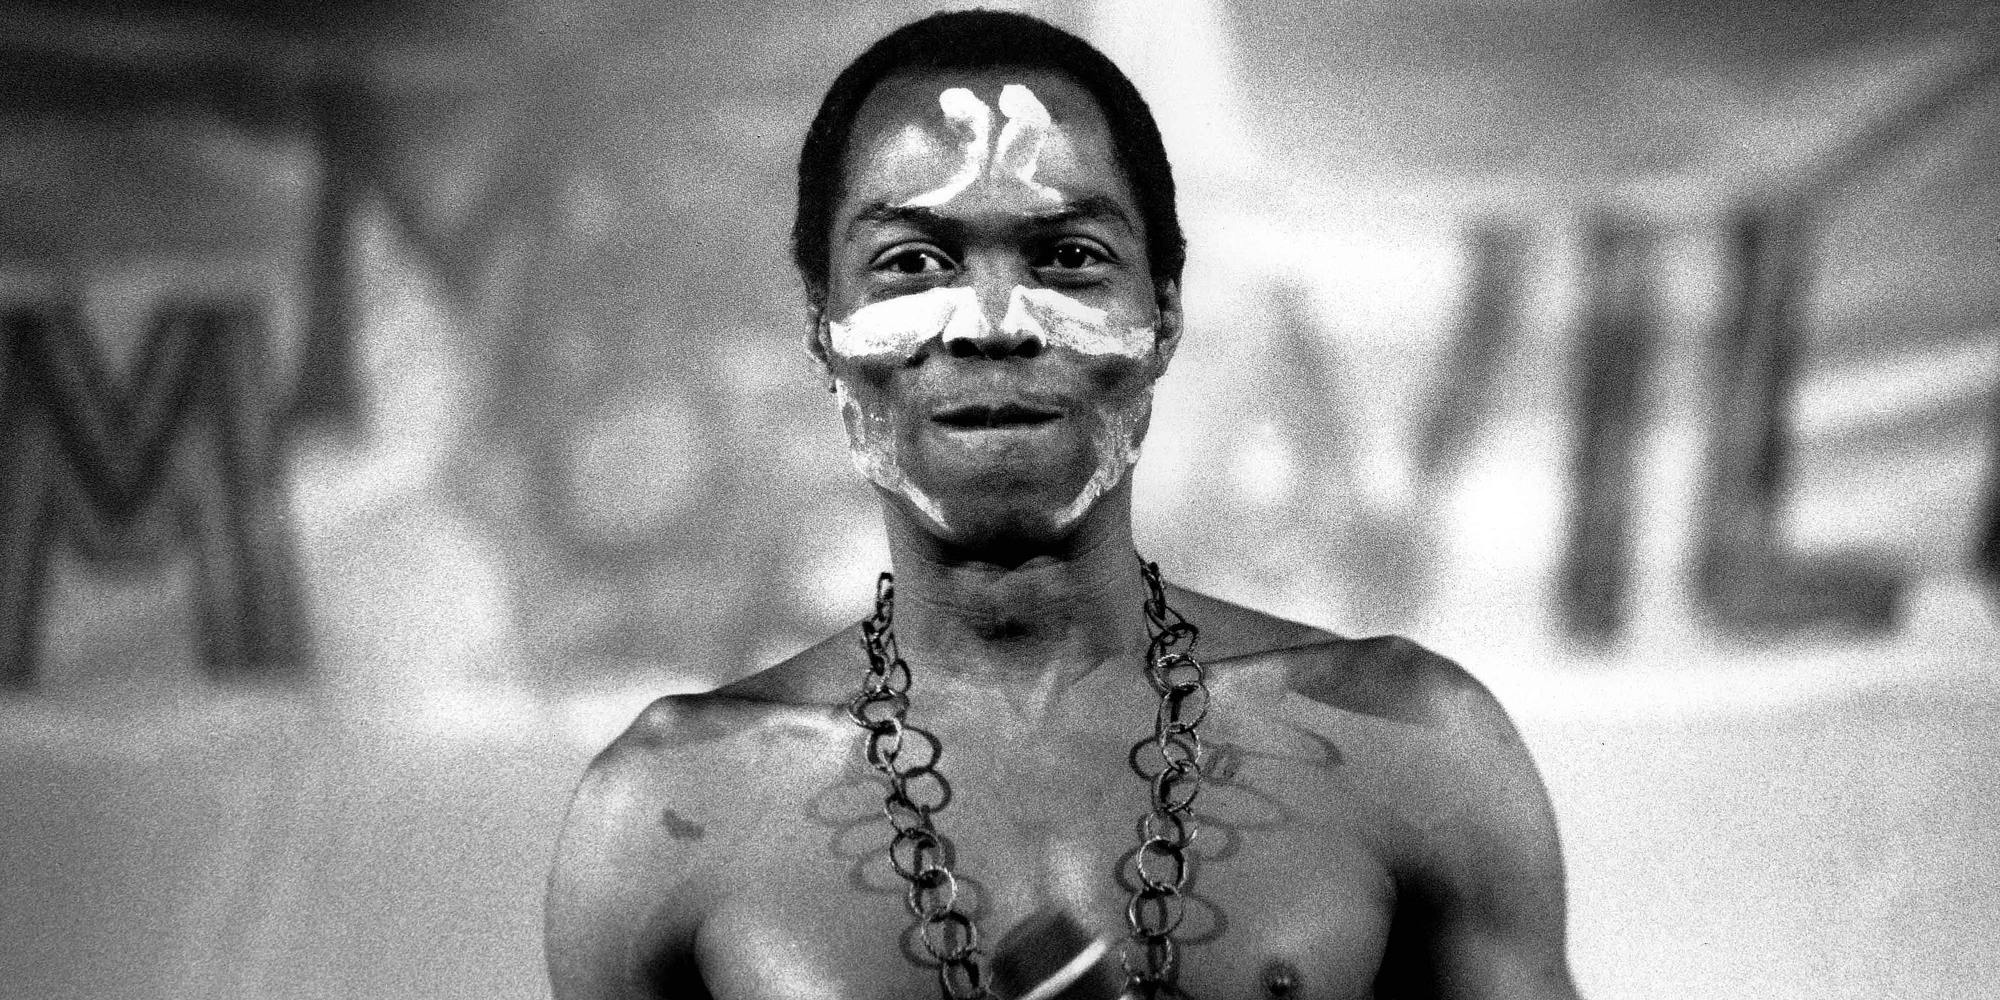 Fela Kuti once ate a joint and police waited 3 days so they could test his shit